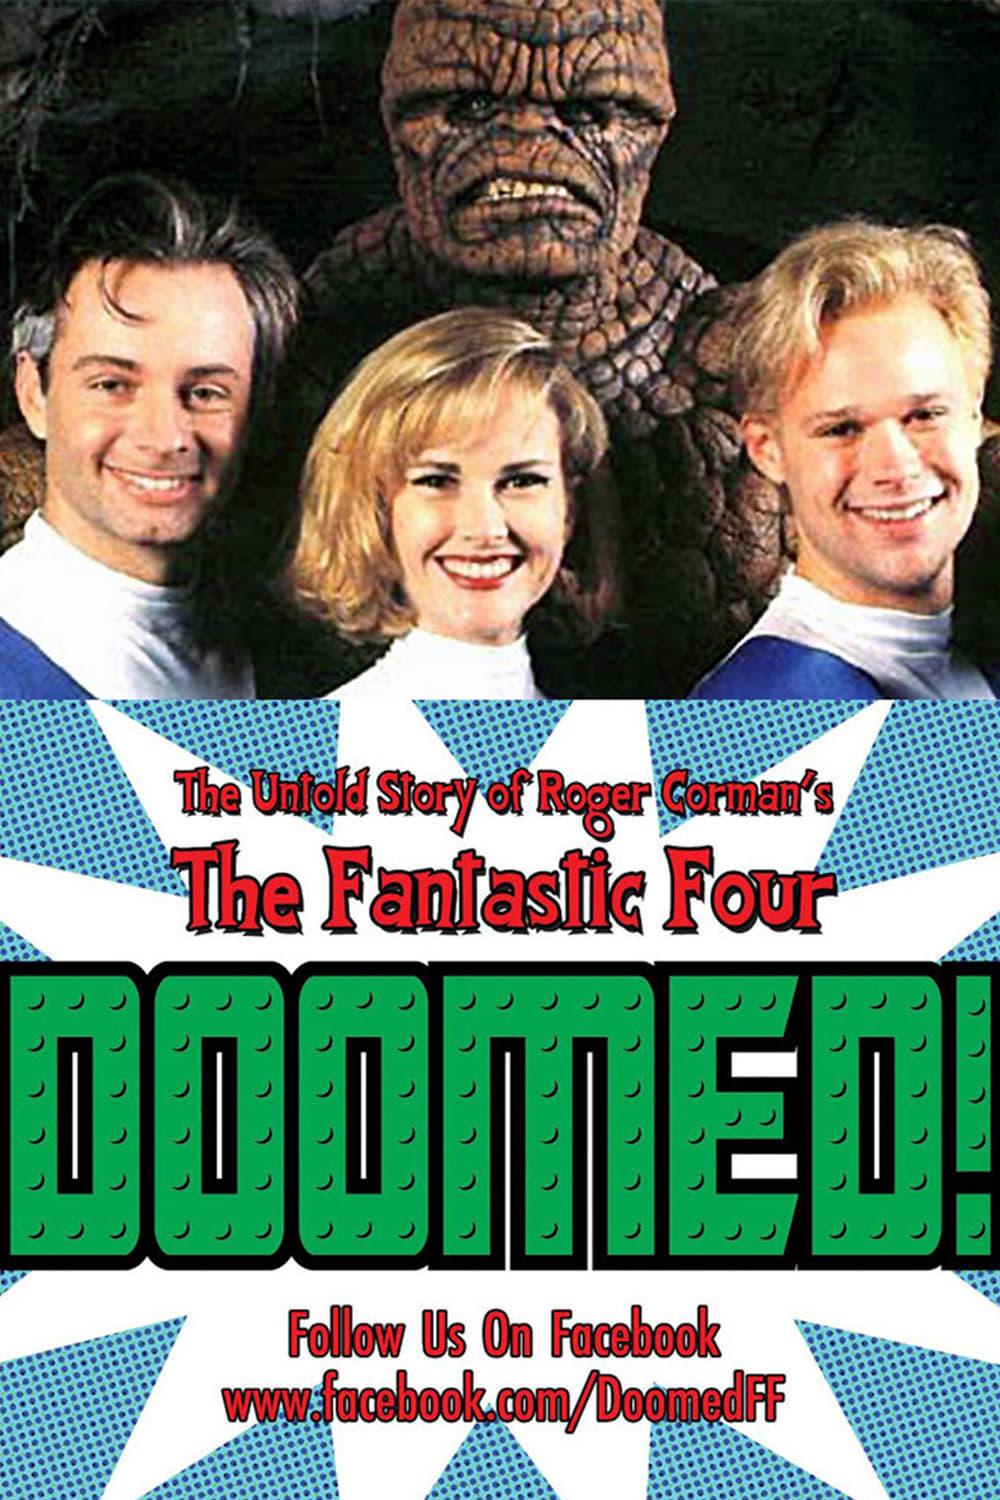 Doomed! The Untold Story of Roger Corman's The Fantastic Four poster